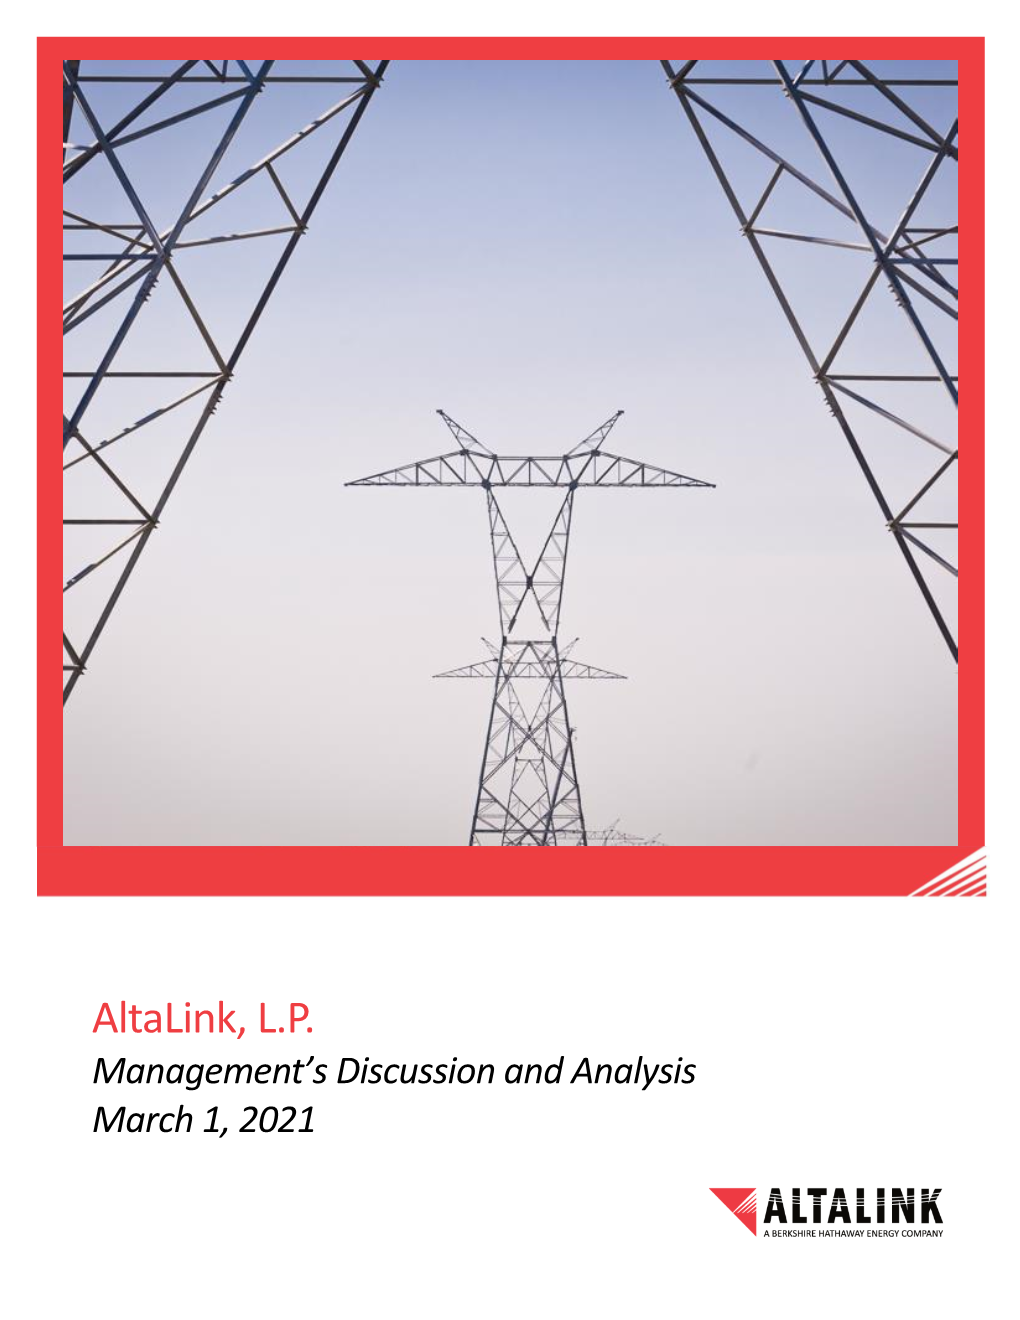 Altalink, L.P. Management’S Discussion and Analysis March 1, 2021